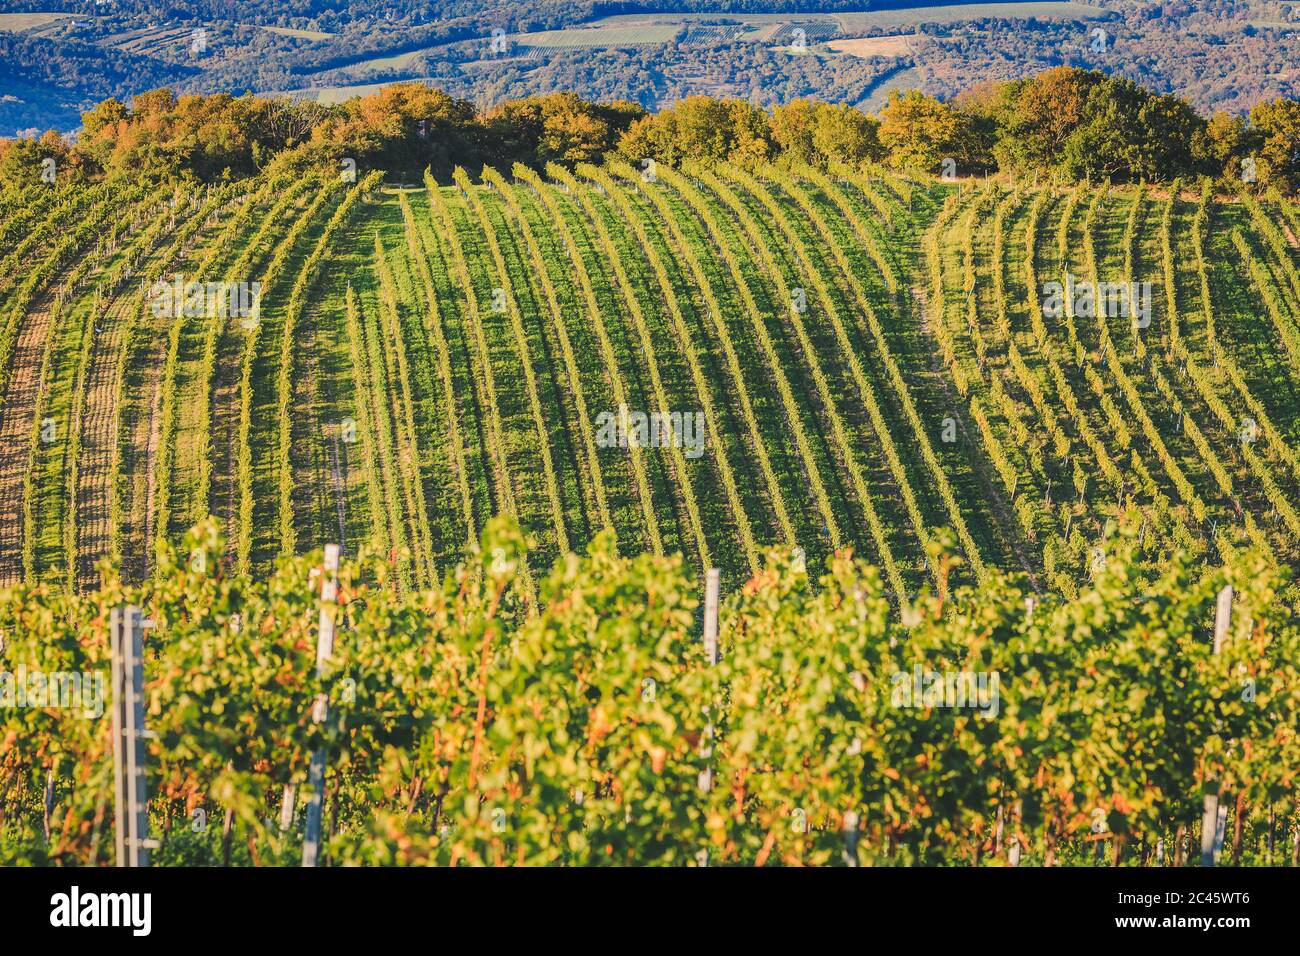 Rows of grapevines during summer period in beautiful wine-growing district in Vieanna Stock Photo